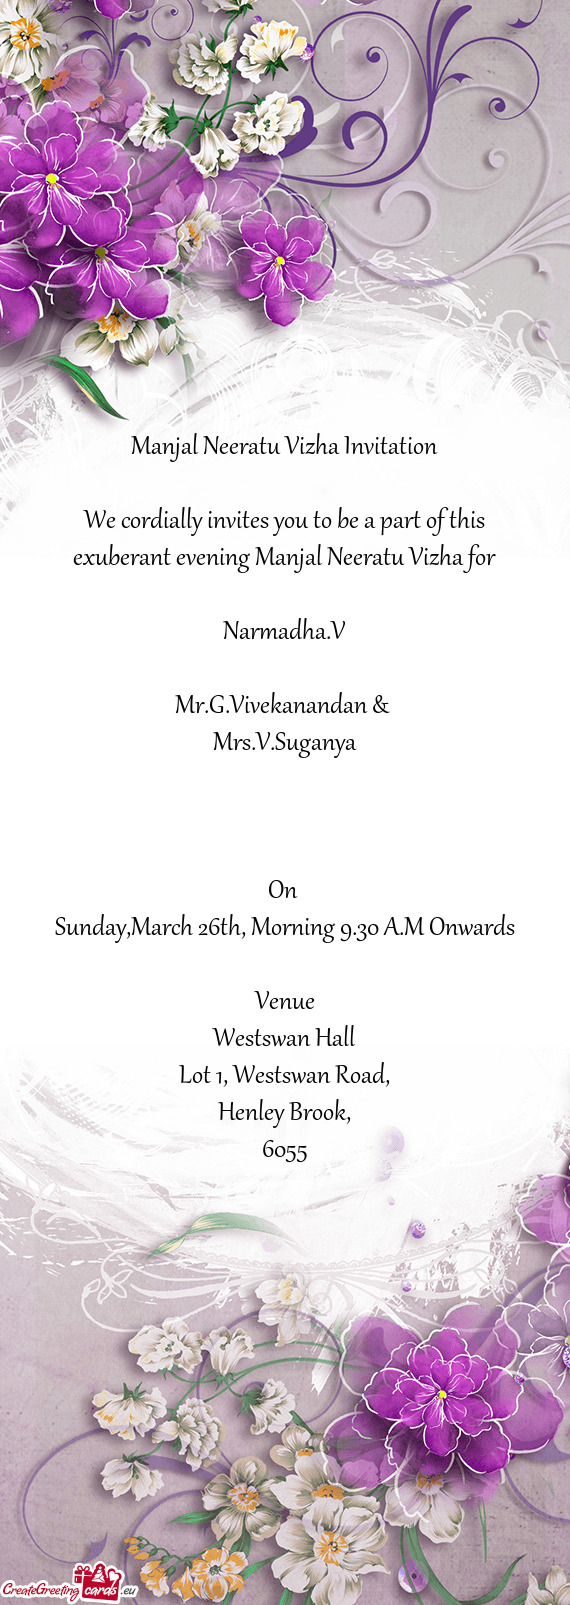 We cordially invites you to be a part of this exuberant evening Manjal Neeratu Vizha for